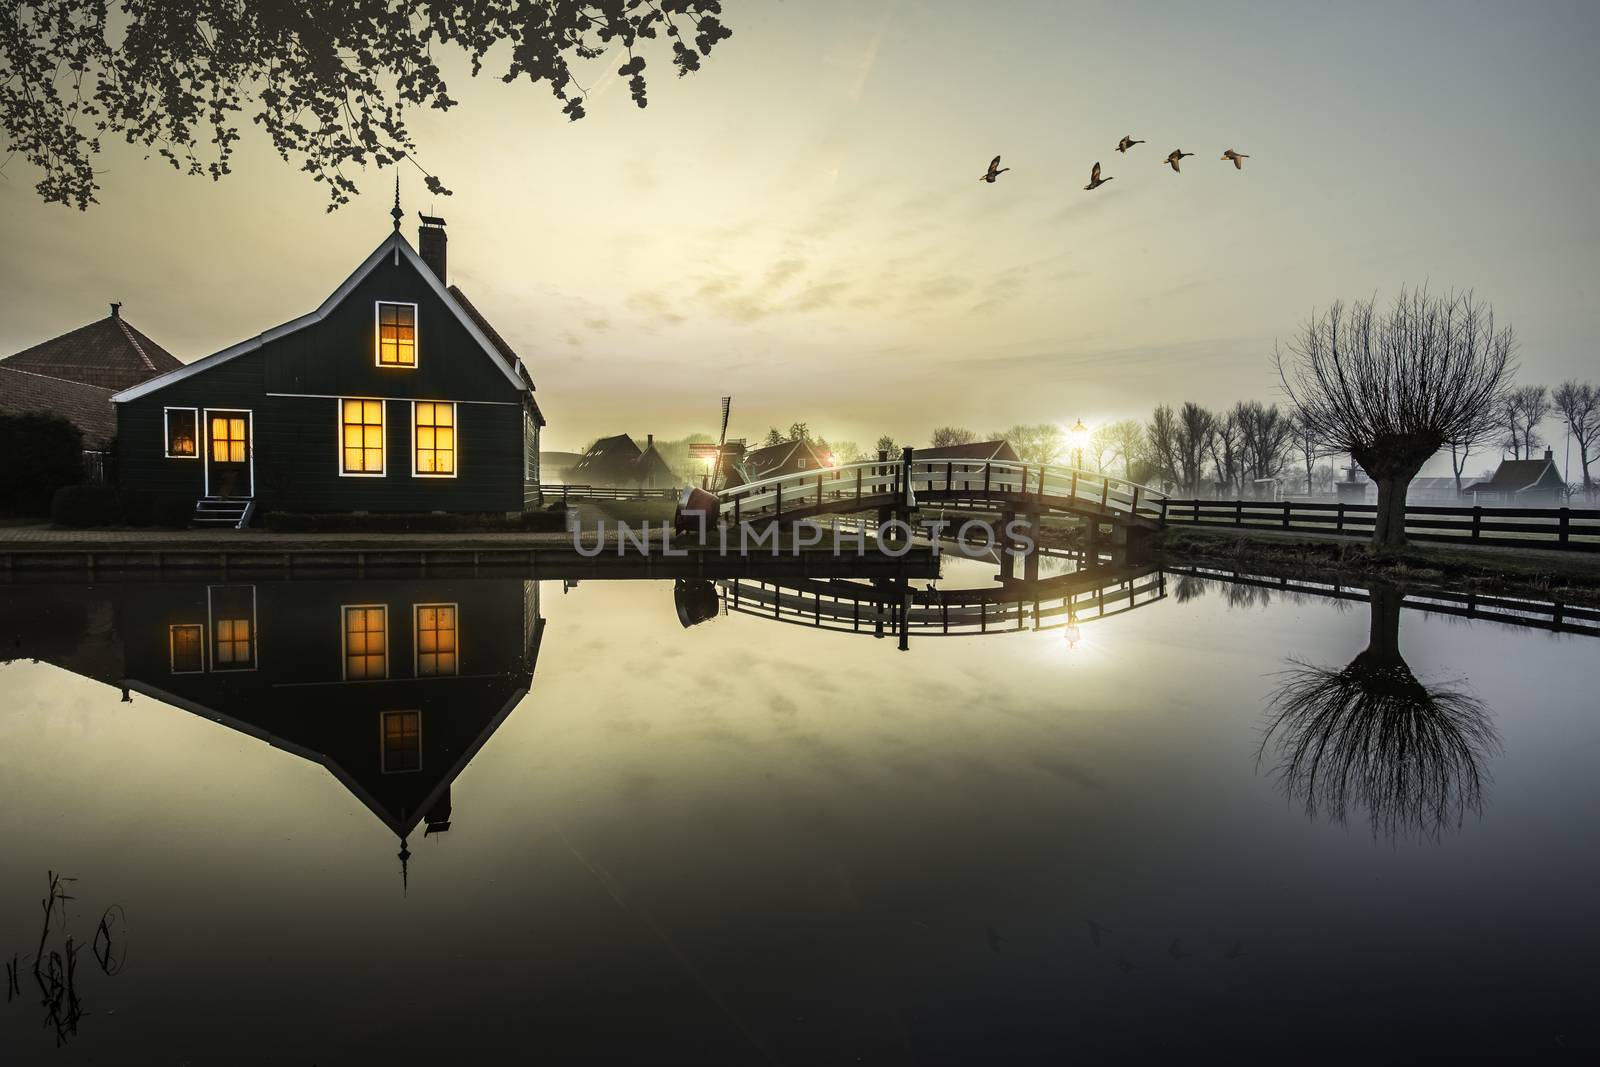 Ducks flying over a beautiful typical Dutch wooden houses architecture at the sunrise moment mirrored on the calm canal of Zaanse Schans located in the North of Amsterdam, Netherlands